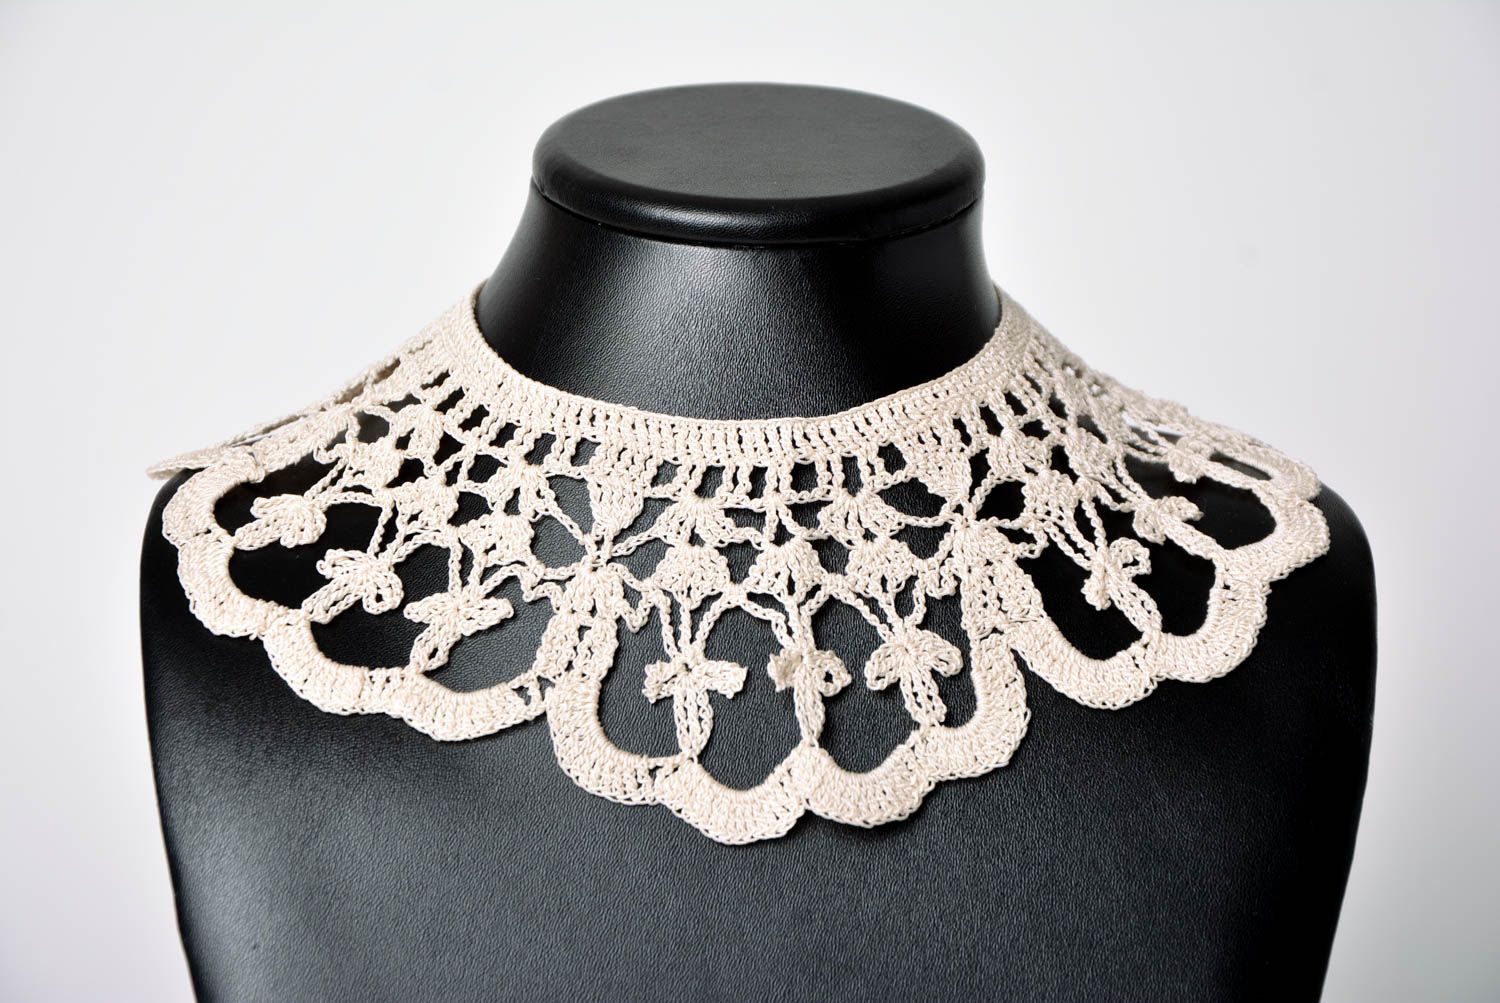 Stylish handmade textile collar crochet lace collar crochet ideas gifts for her photo 1